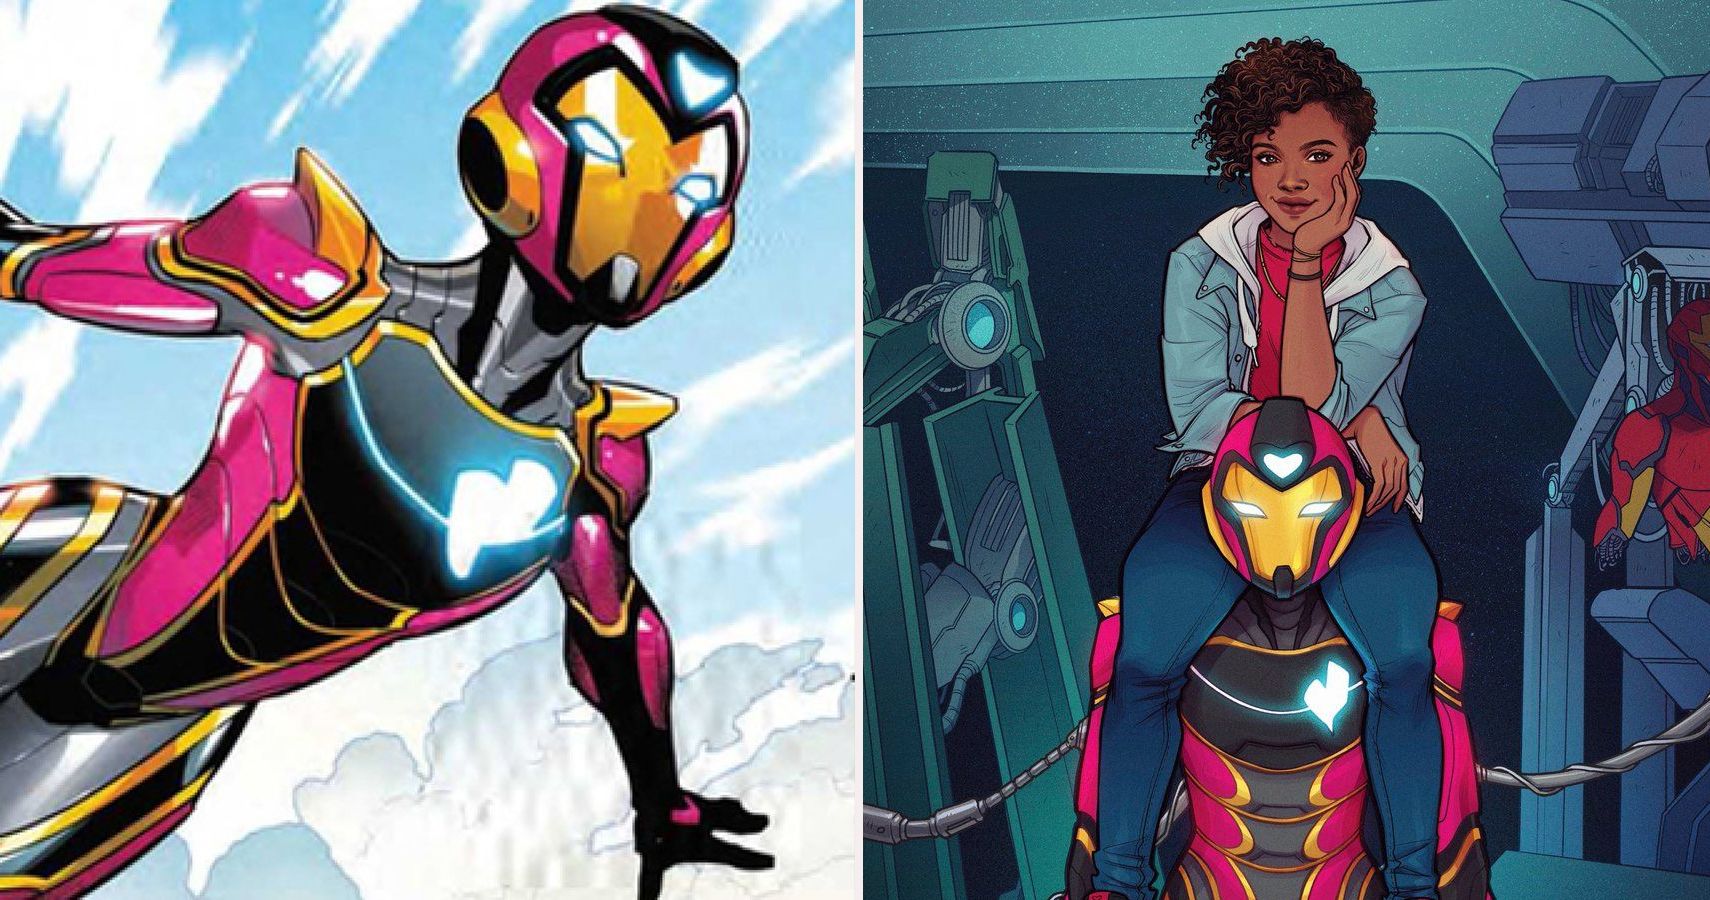 Transformers Star Cast in Ironheart